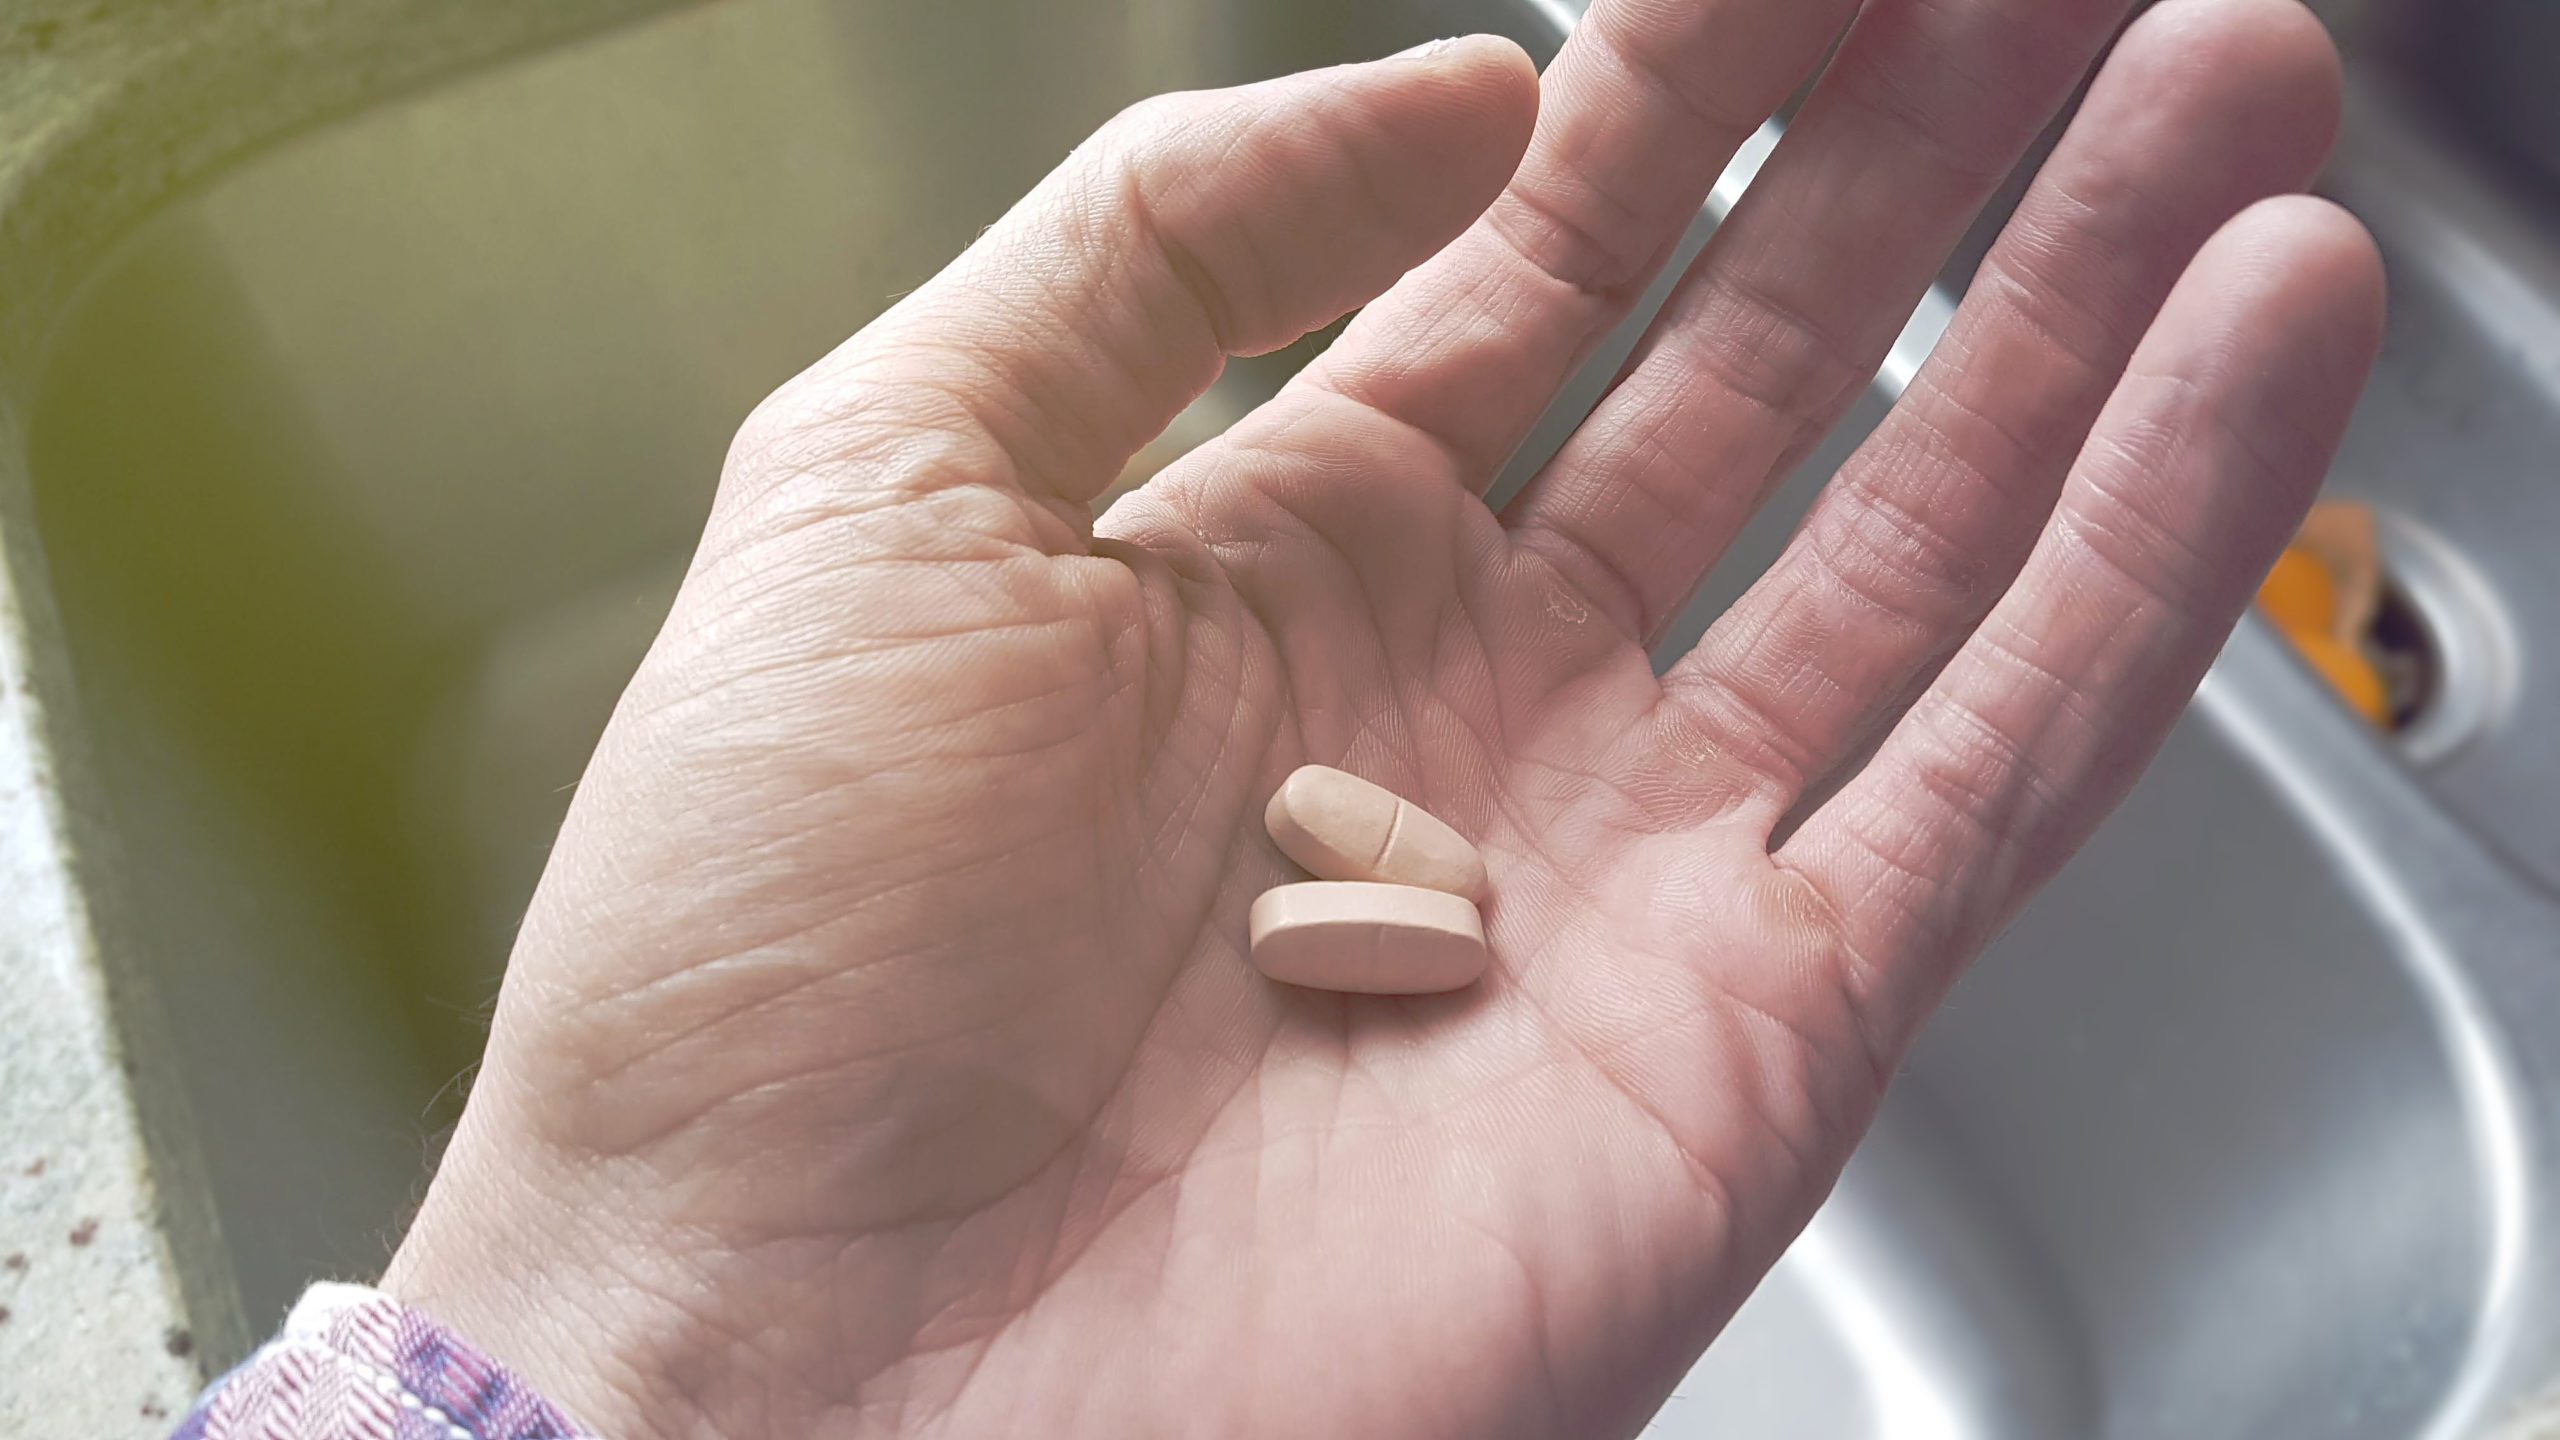 Benzos, can be a miracle for individuals struggling with anxiety, tremors, or seizures. Learn more about benzos in this article.